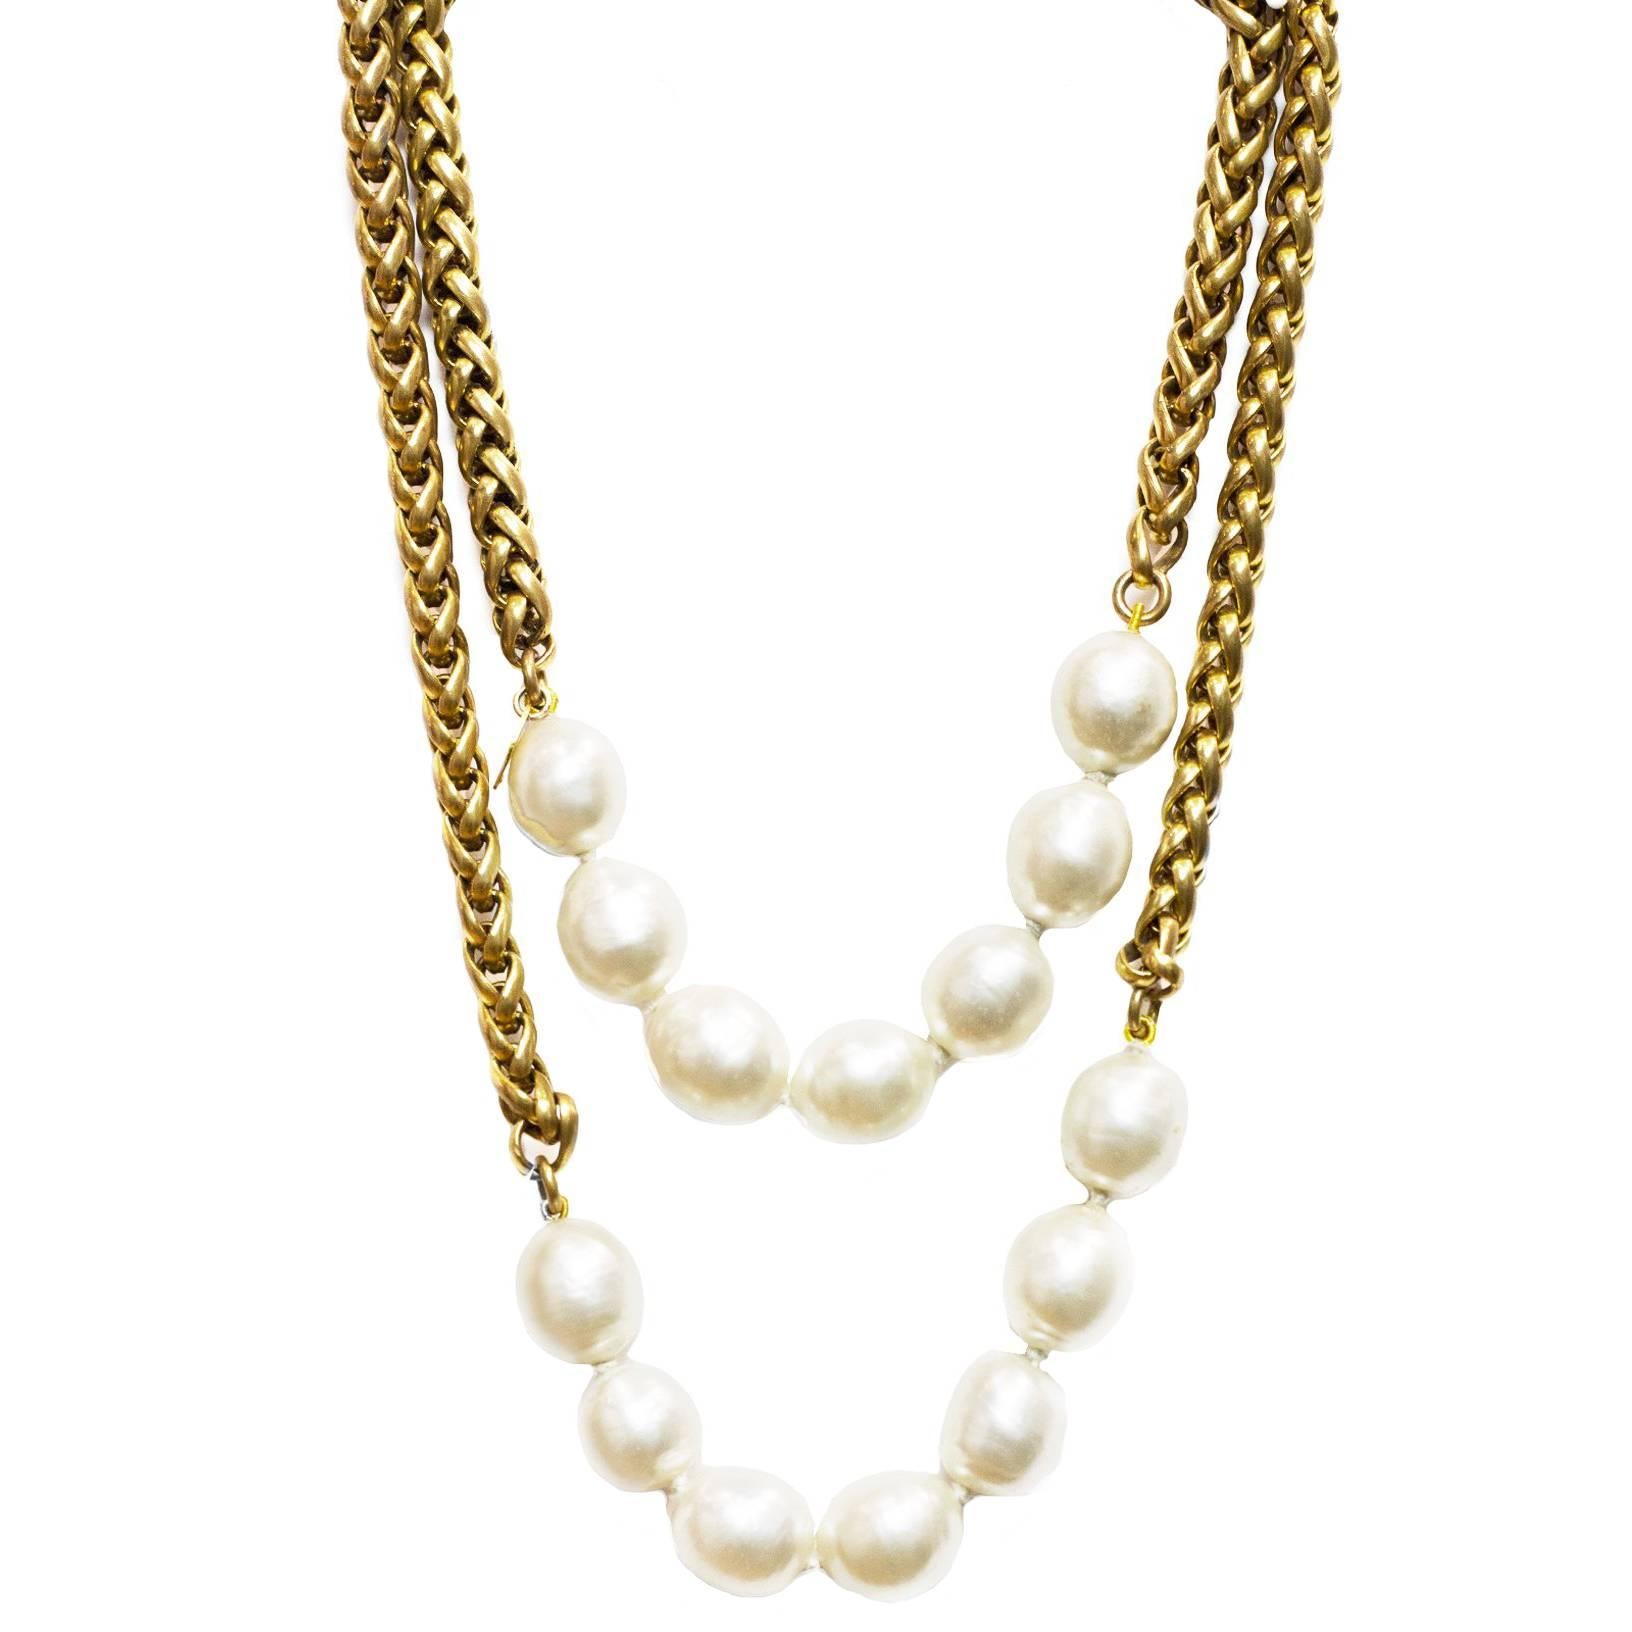 CHANEL Goldtone Necklace W. Two Faux Pearl Sections 1984